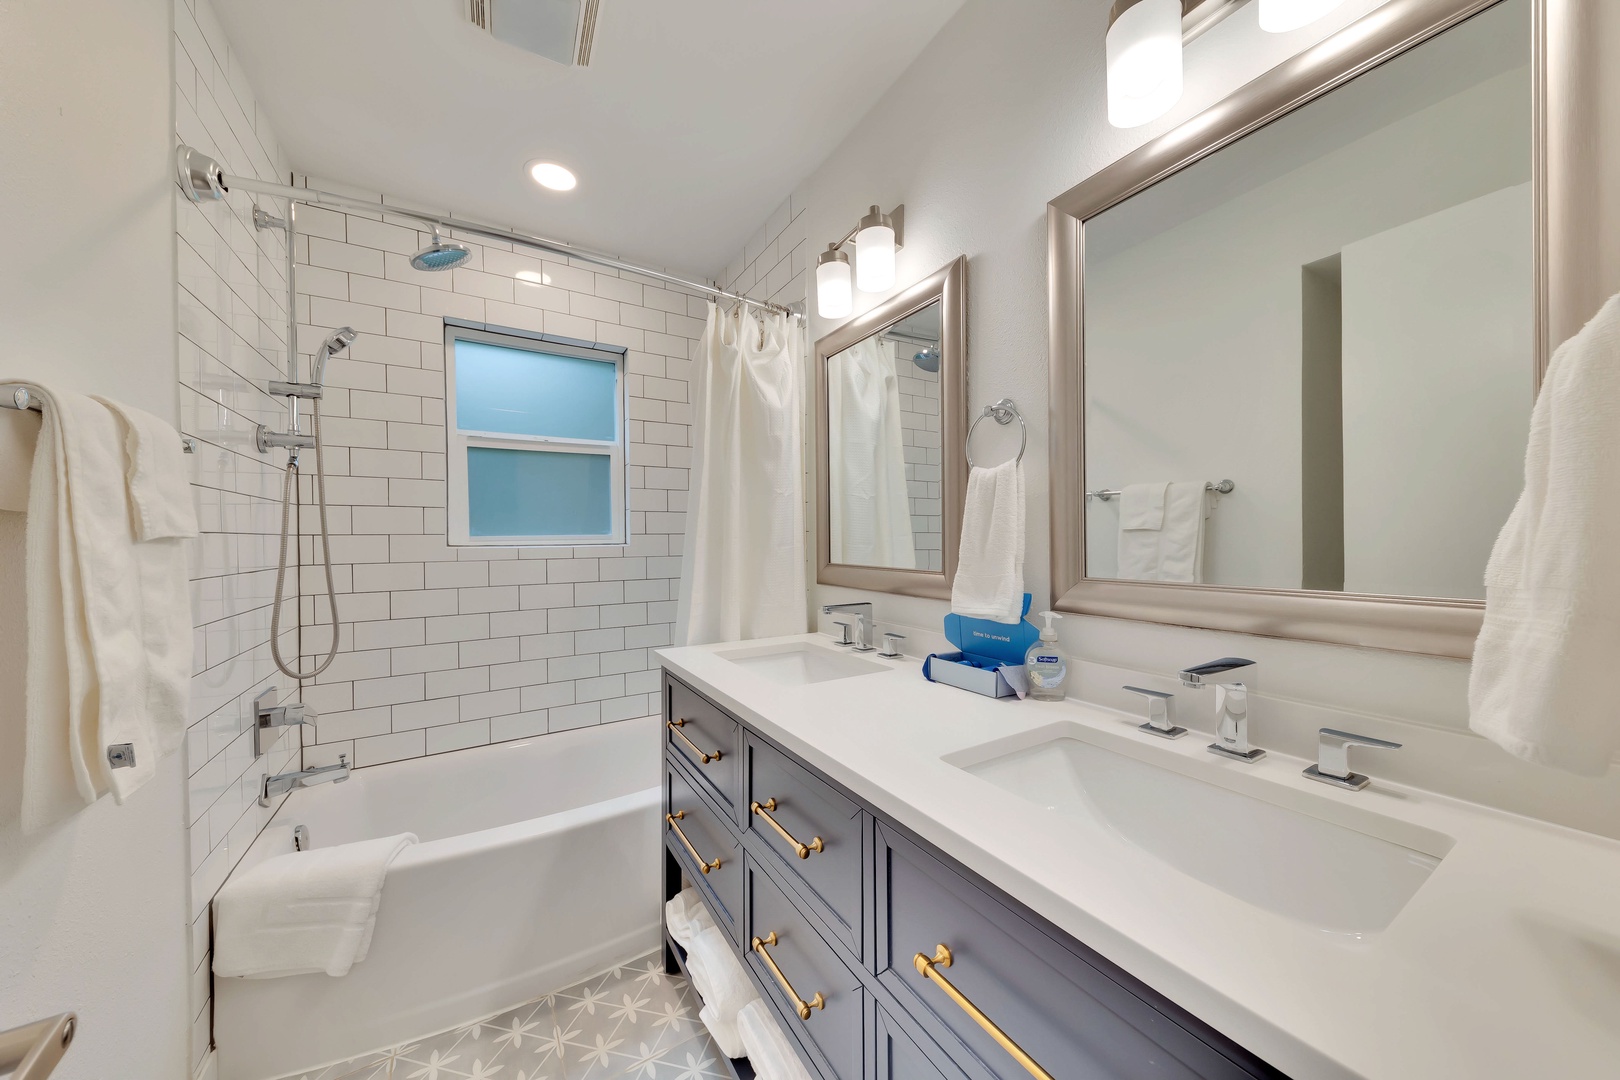 The hall bathroom offers an oversized double vanity & shower/tub combo